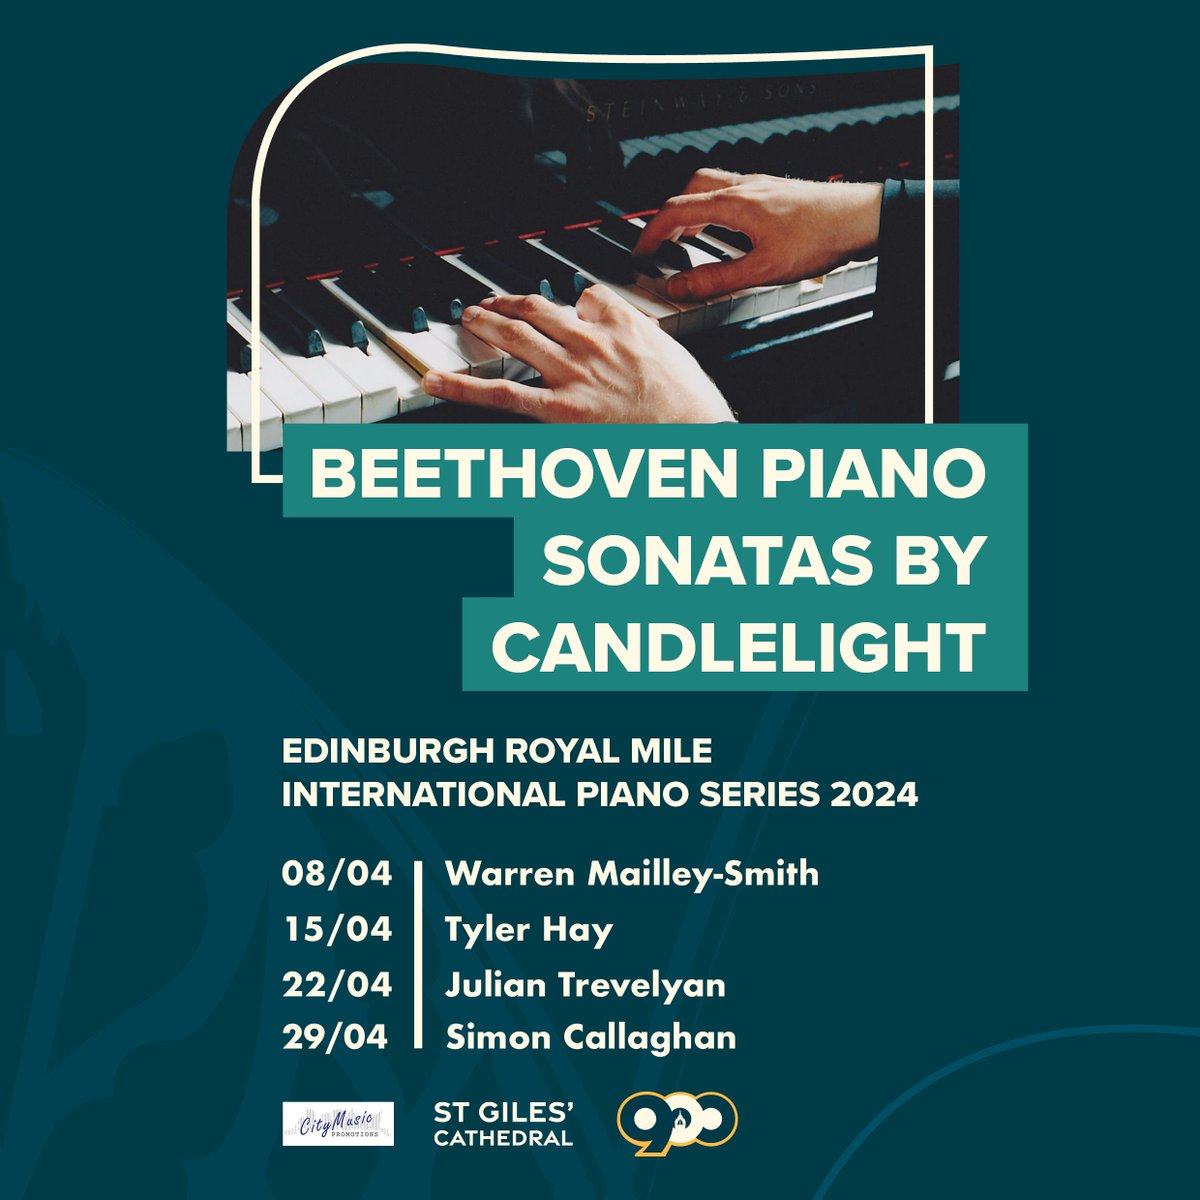 We are very excited to announce a dedicated mini-series of one-hour piano recitals in the month of April 2024 featuring four of the country's leading concert pianists and four of Beethoven's greatest masterpieces. Book your tickets now at buff.ly/4aCQN8F